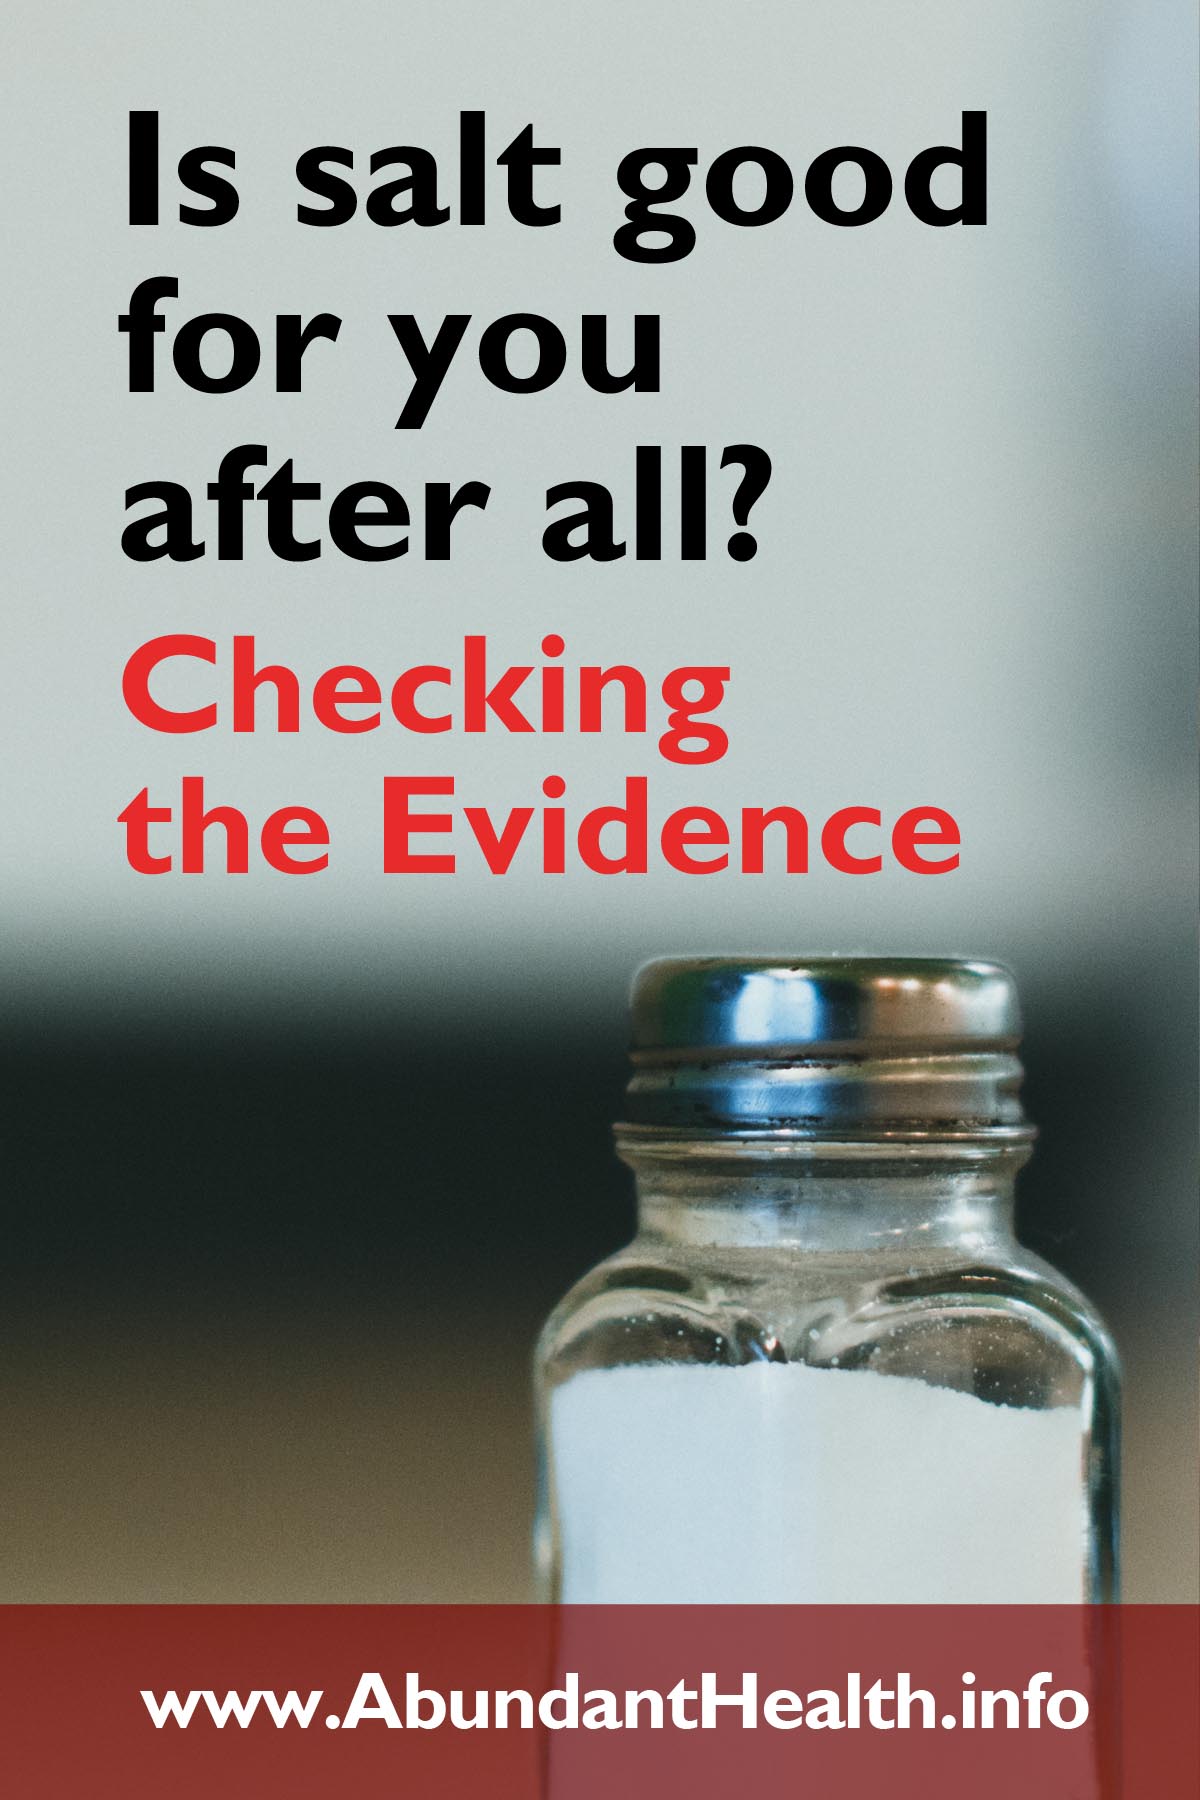 Is salt good for you after all? Checking the Evidence!